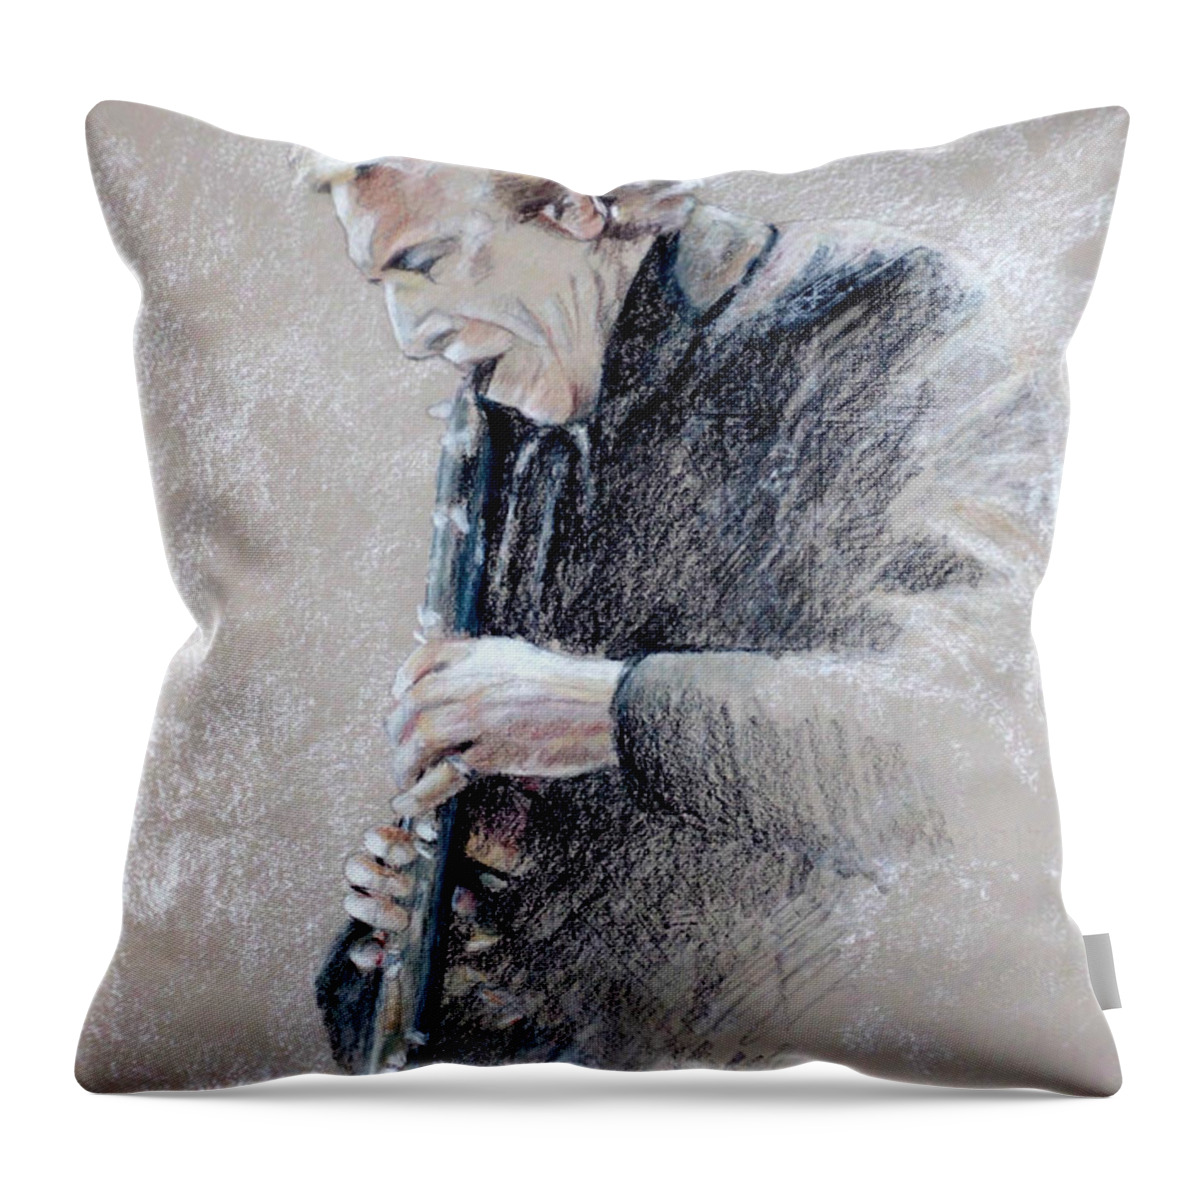 Portraits Throw Pillow featuring the painting Trumpetist Flamenco by Miki De Goodaboom